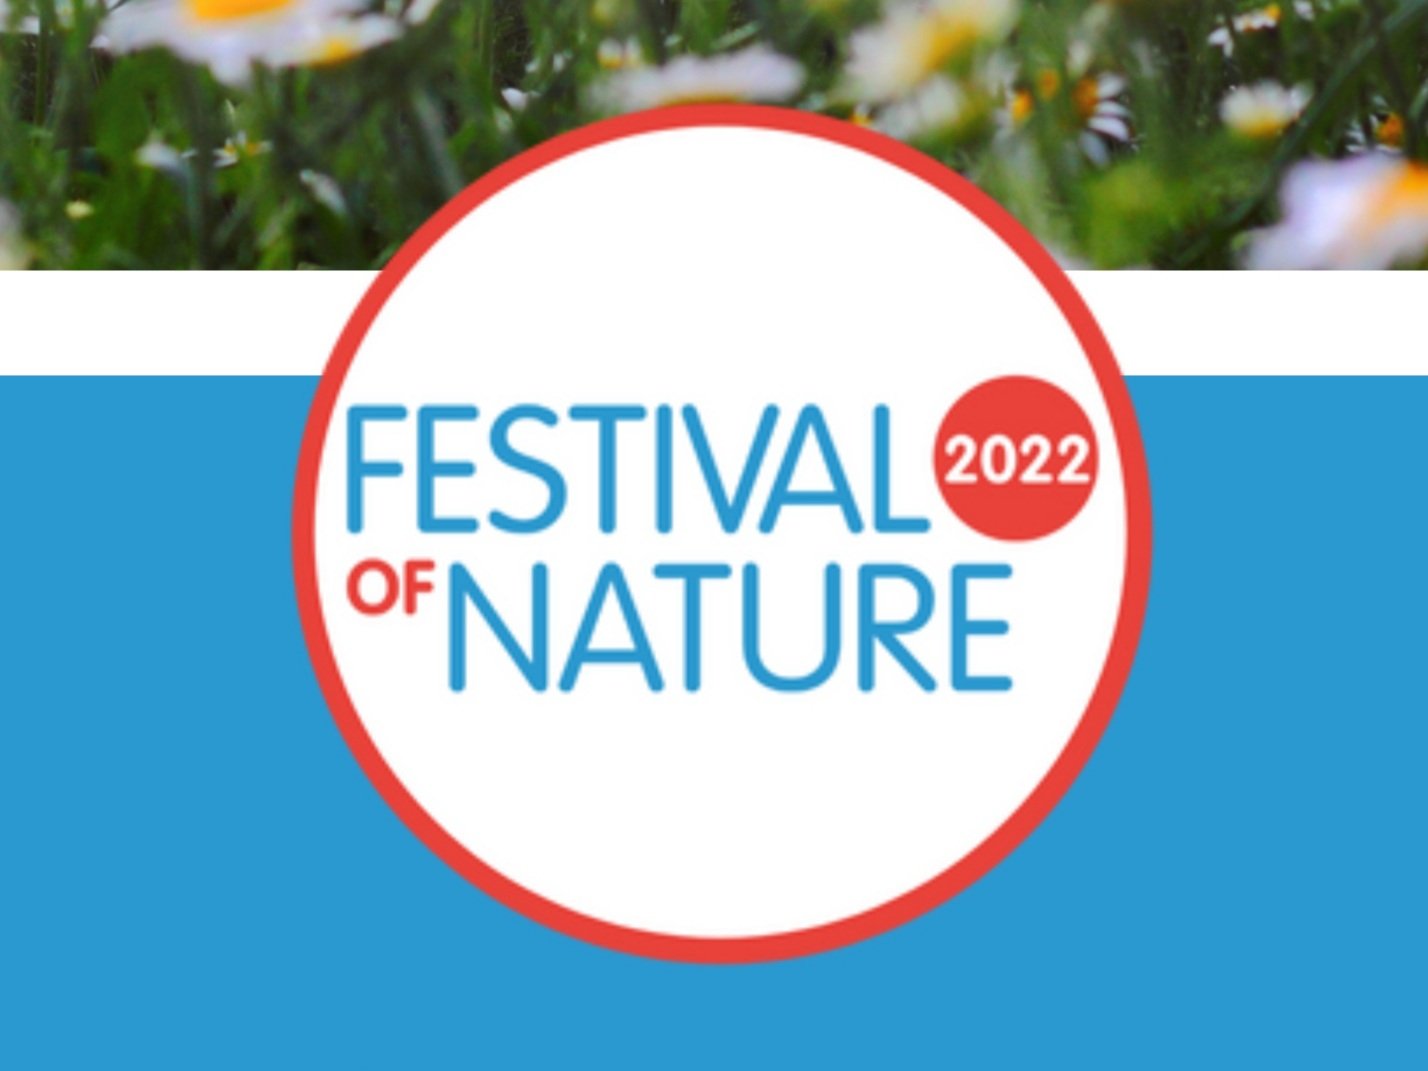 Festival of Nature circular logo in red, white, and blue. Horizontal split image background - top is white daisies in green field, bottom is mid-blue block colour.